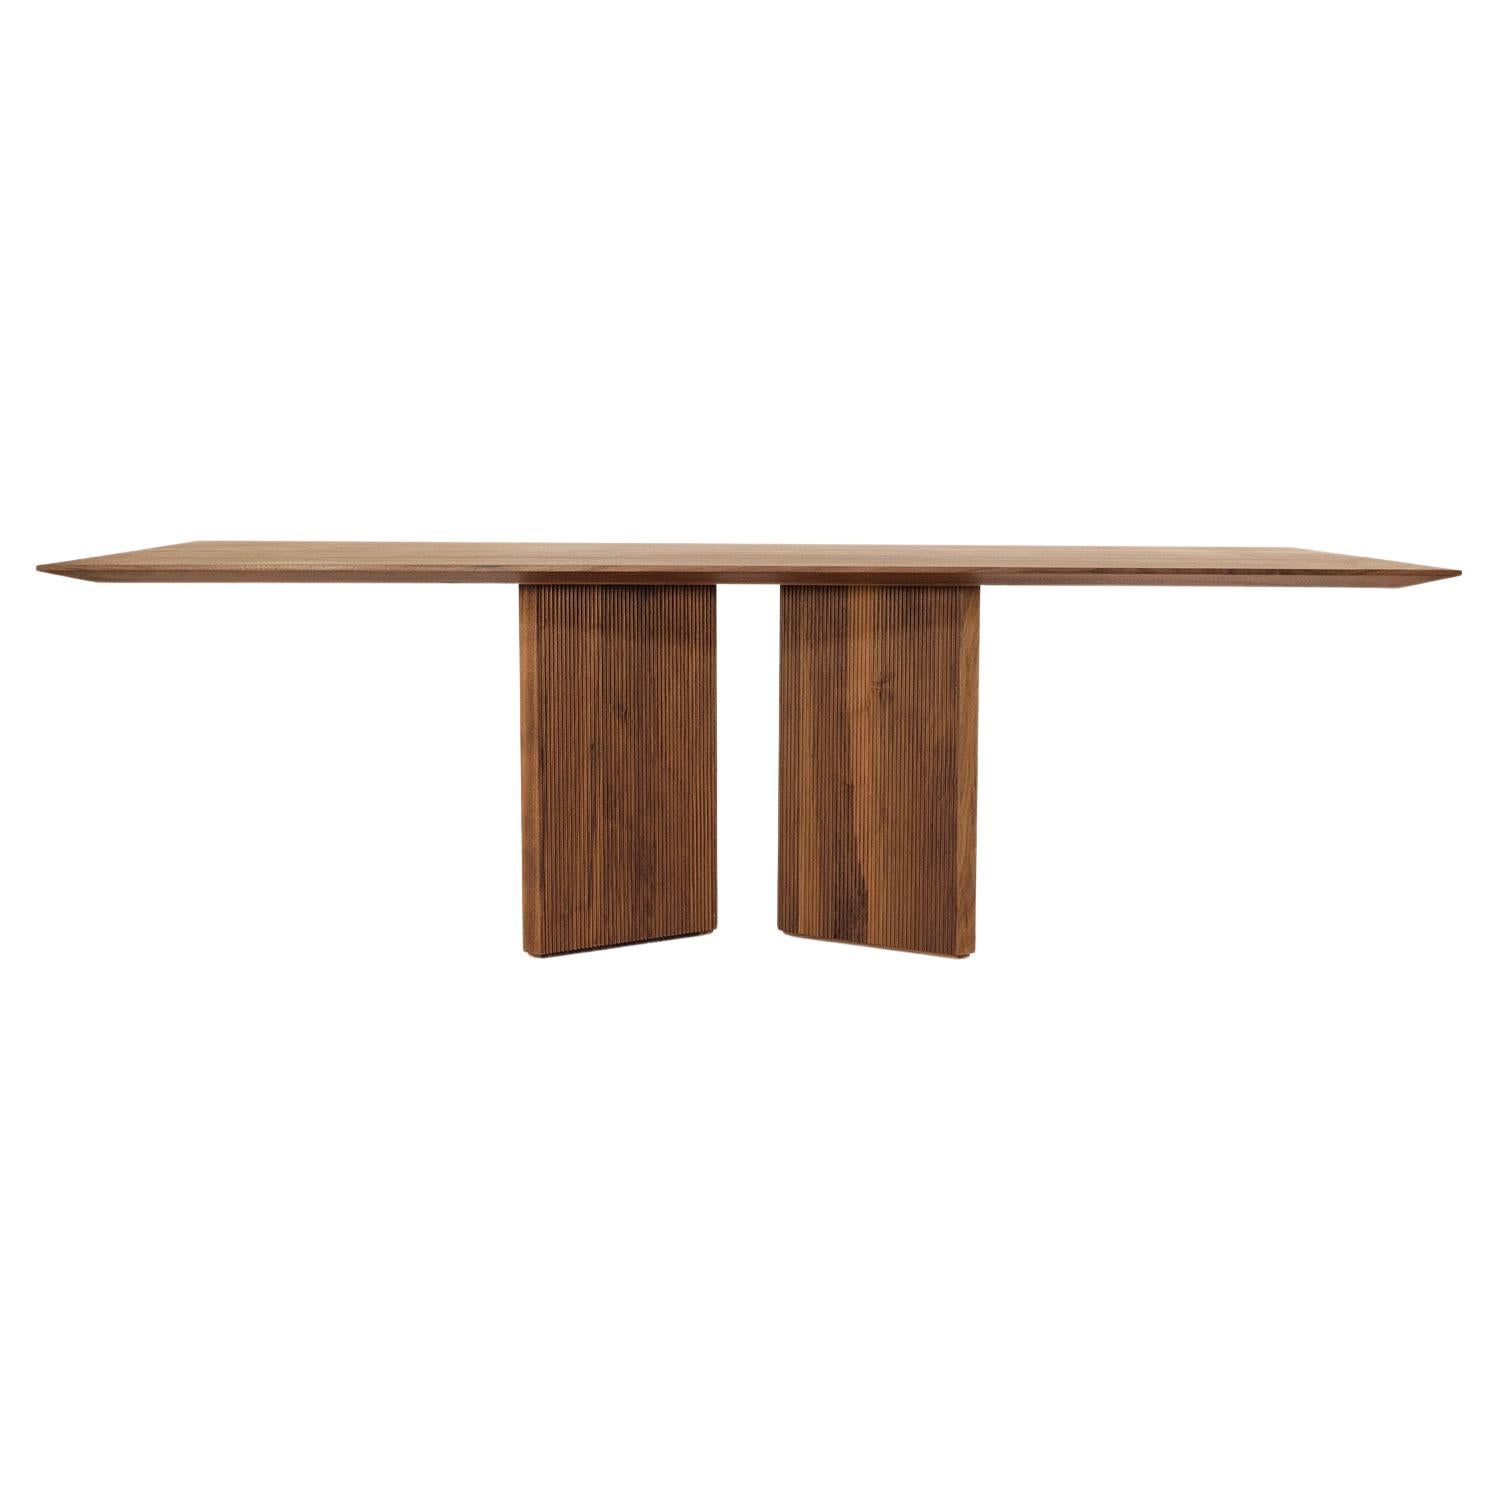 Revo Wood Dining Table by Giuliano and Gabriele Cappelletti, Made in Italy For Sale